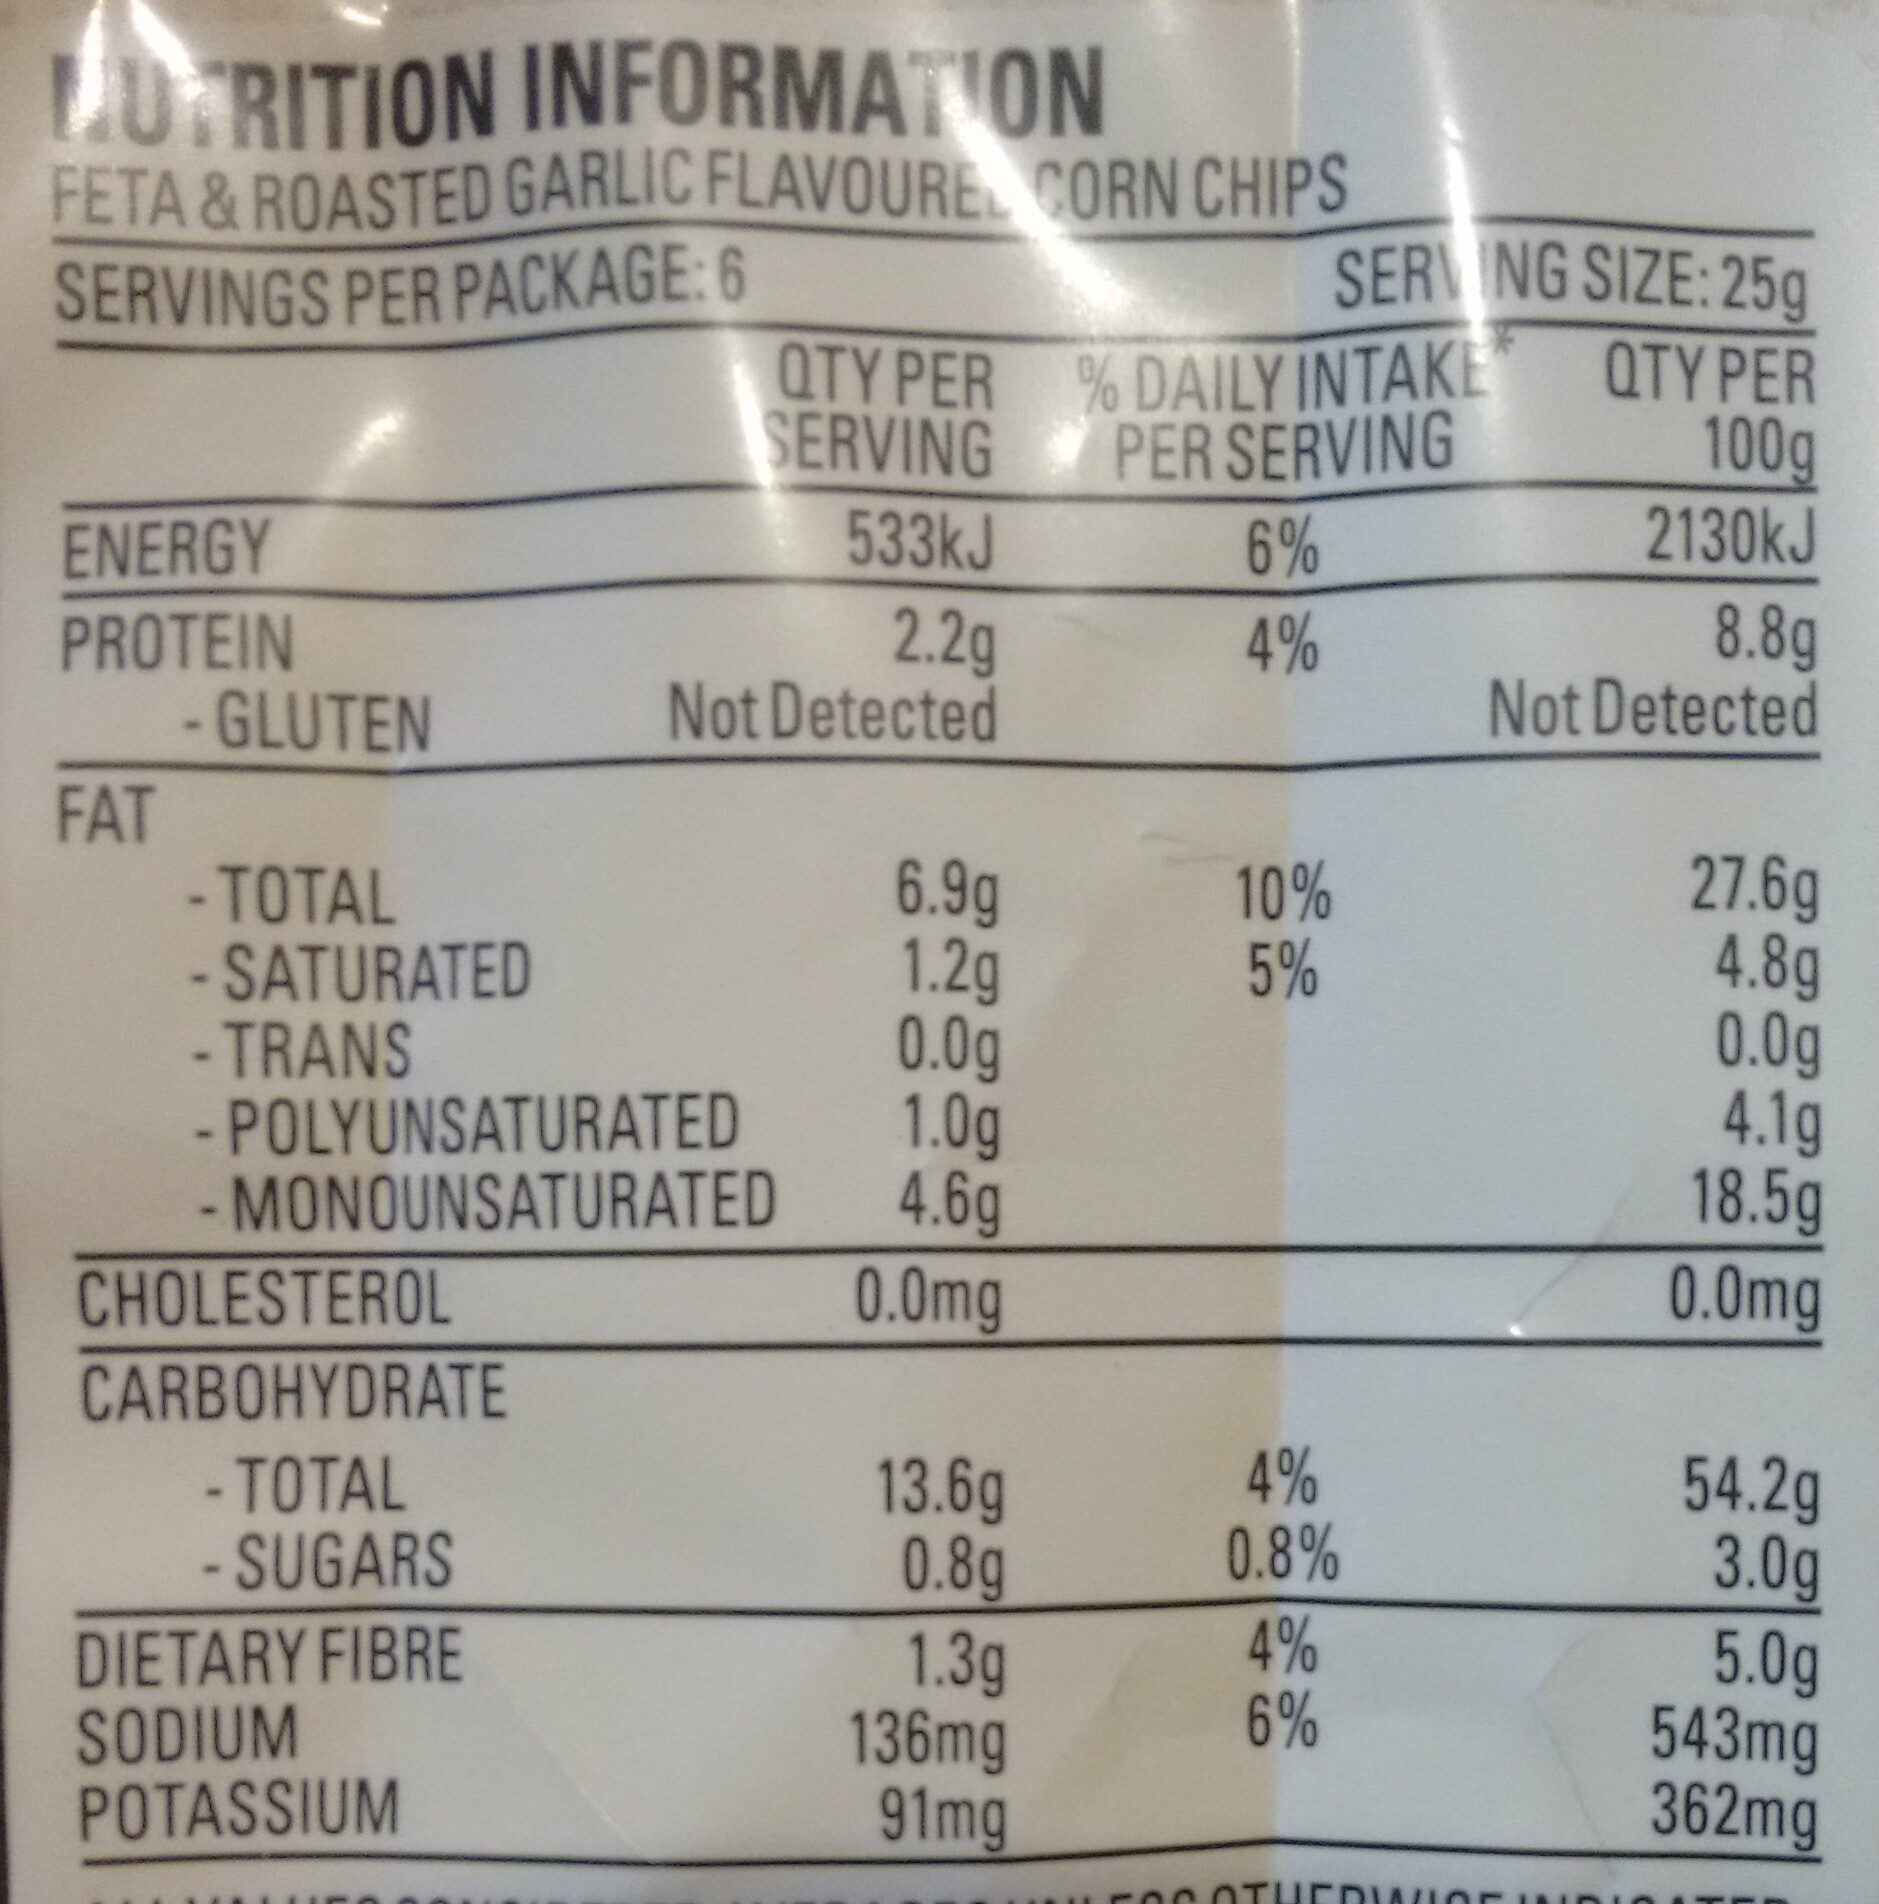 Uppercuts Feta & Roasted Garlic Flavoured Corn Chips - Nutrition facts